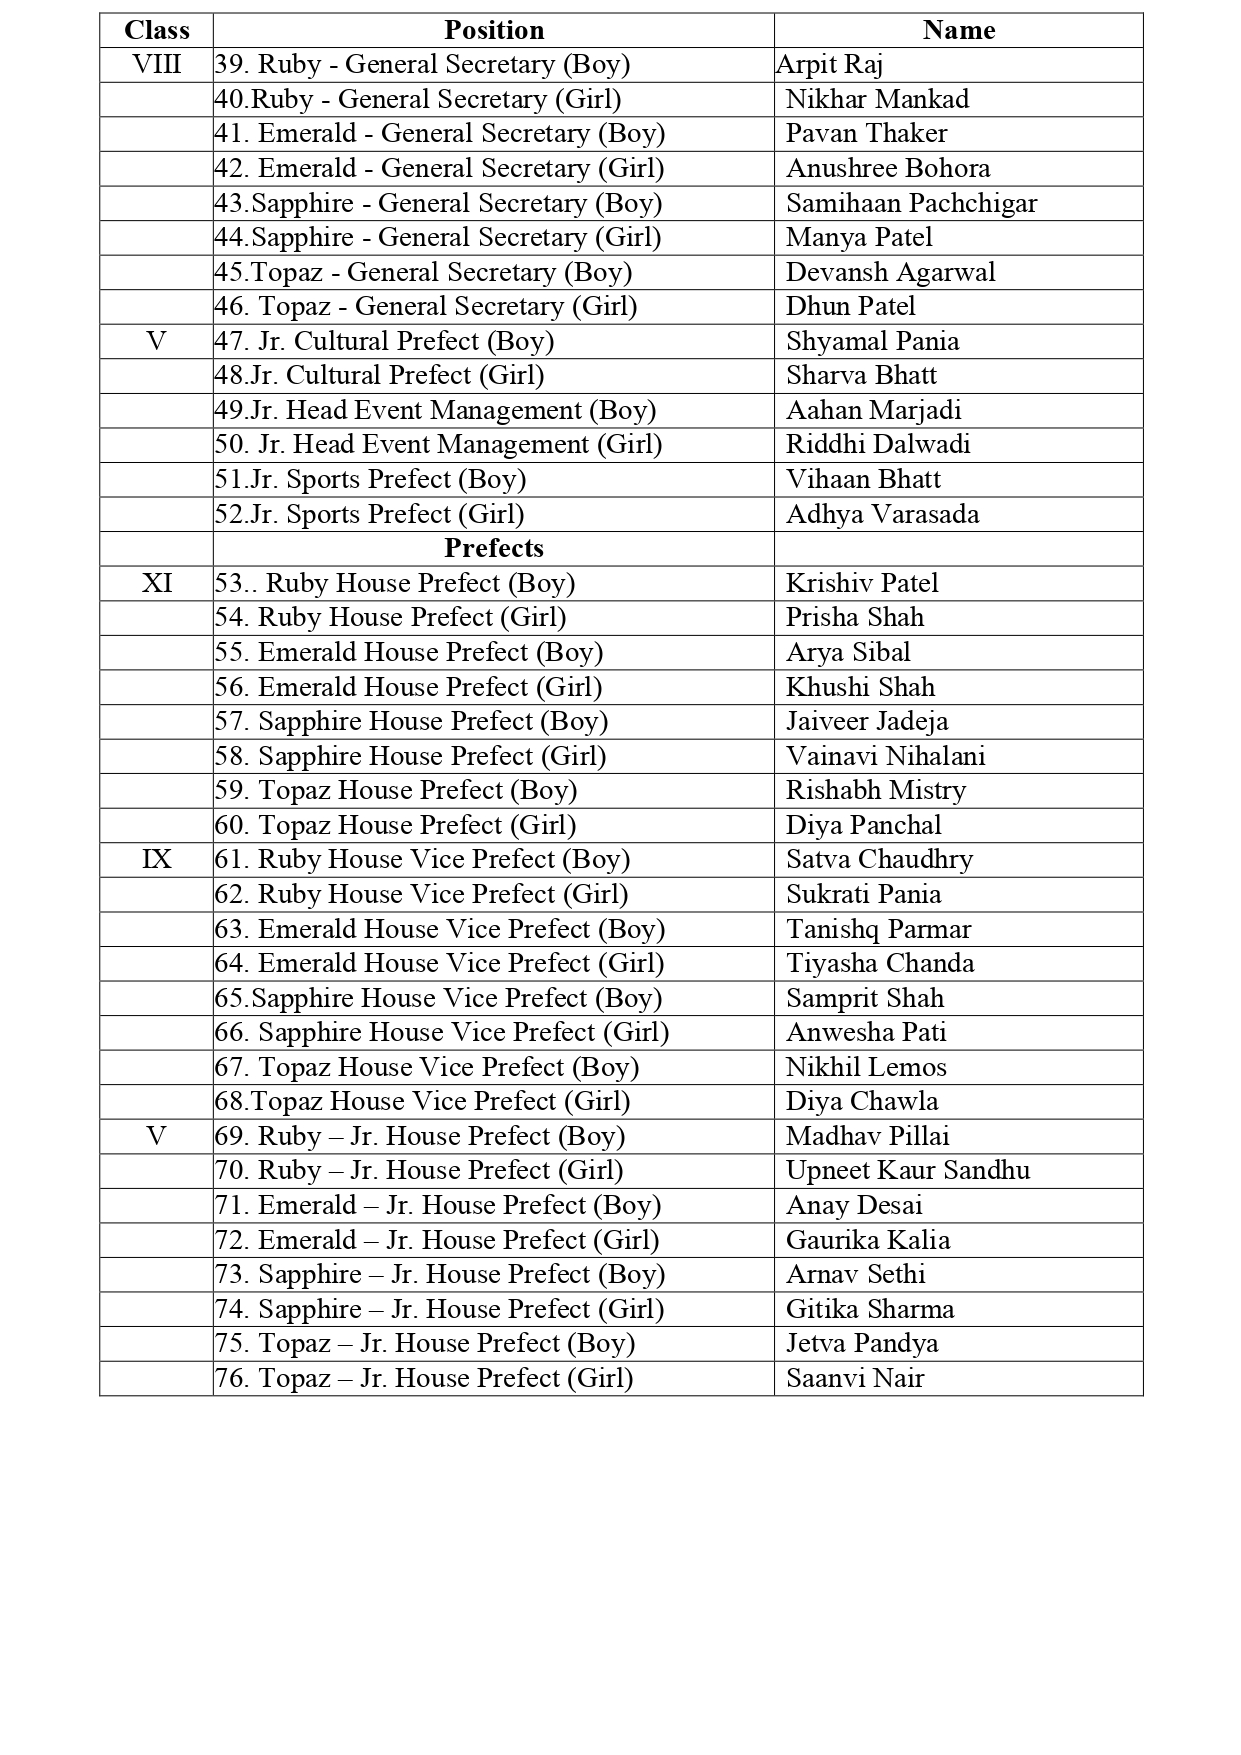 Student council student list 22-23_page-0002